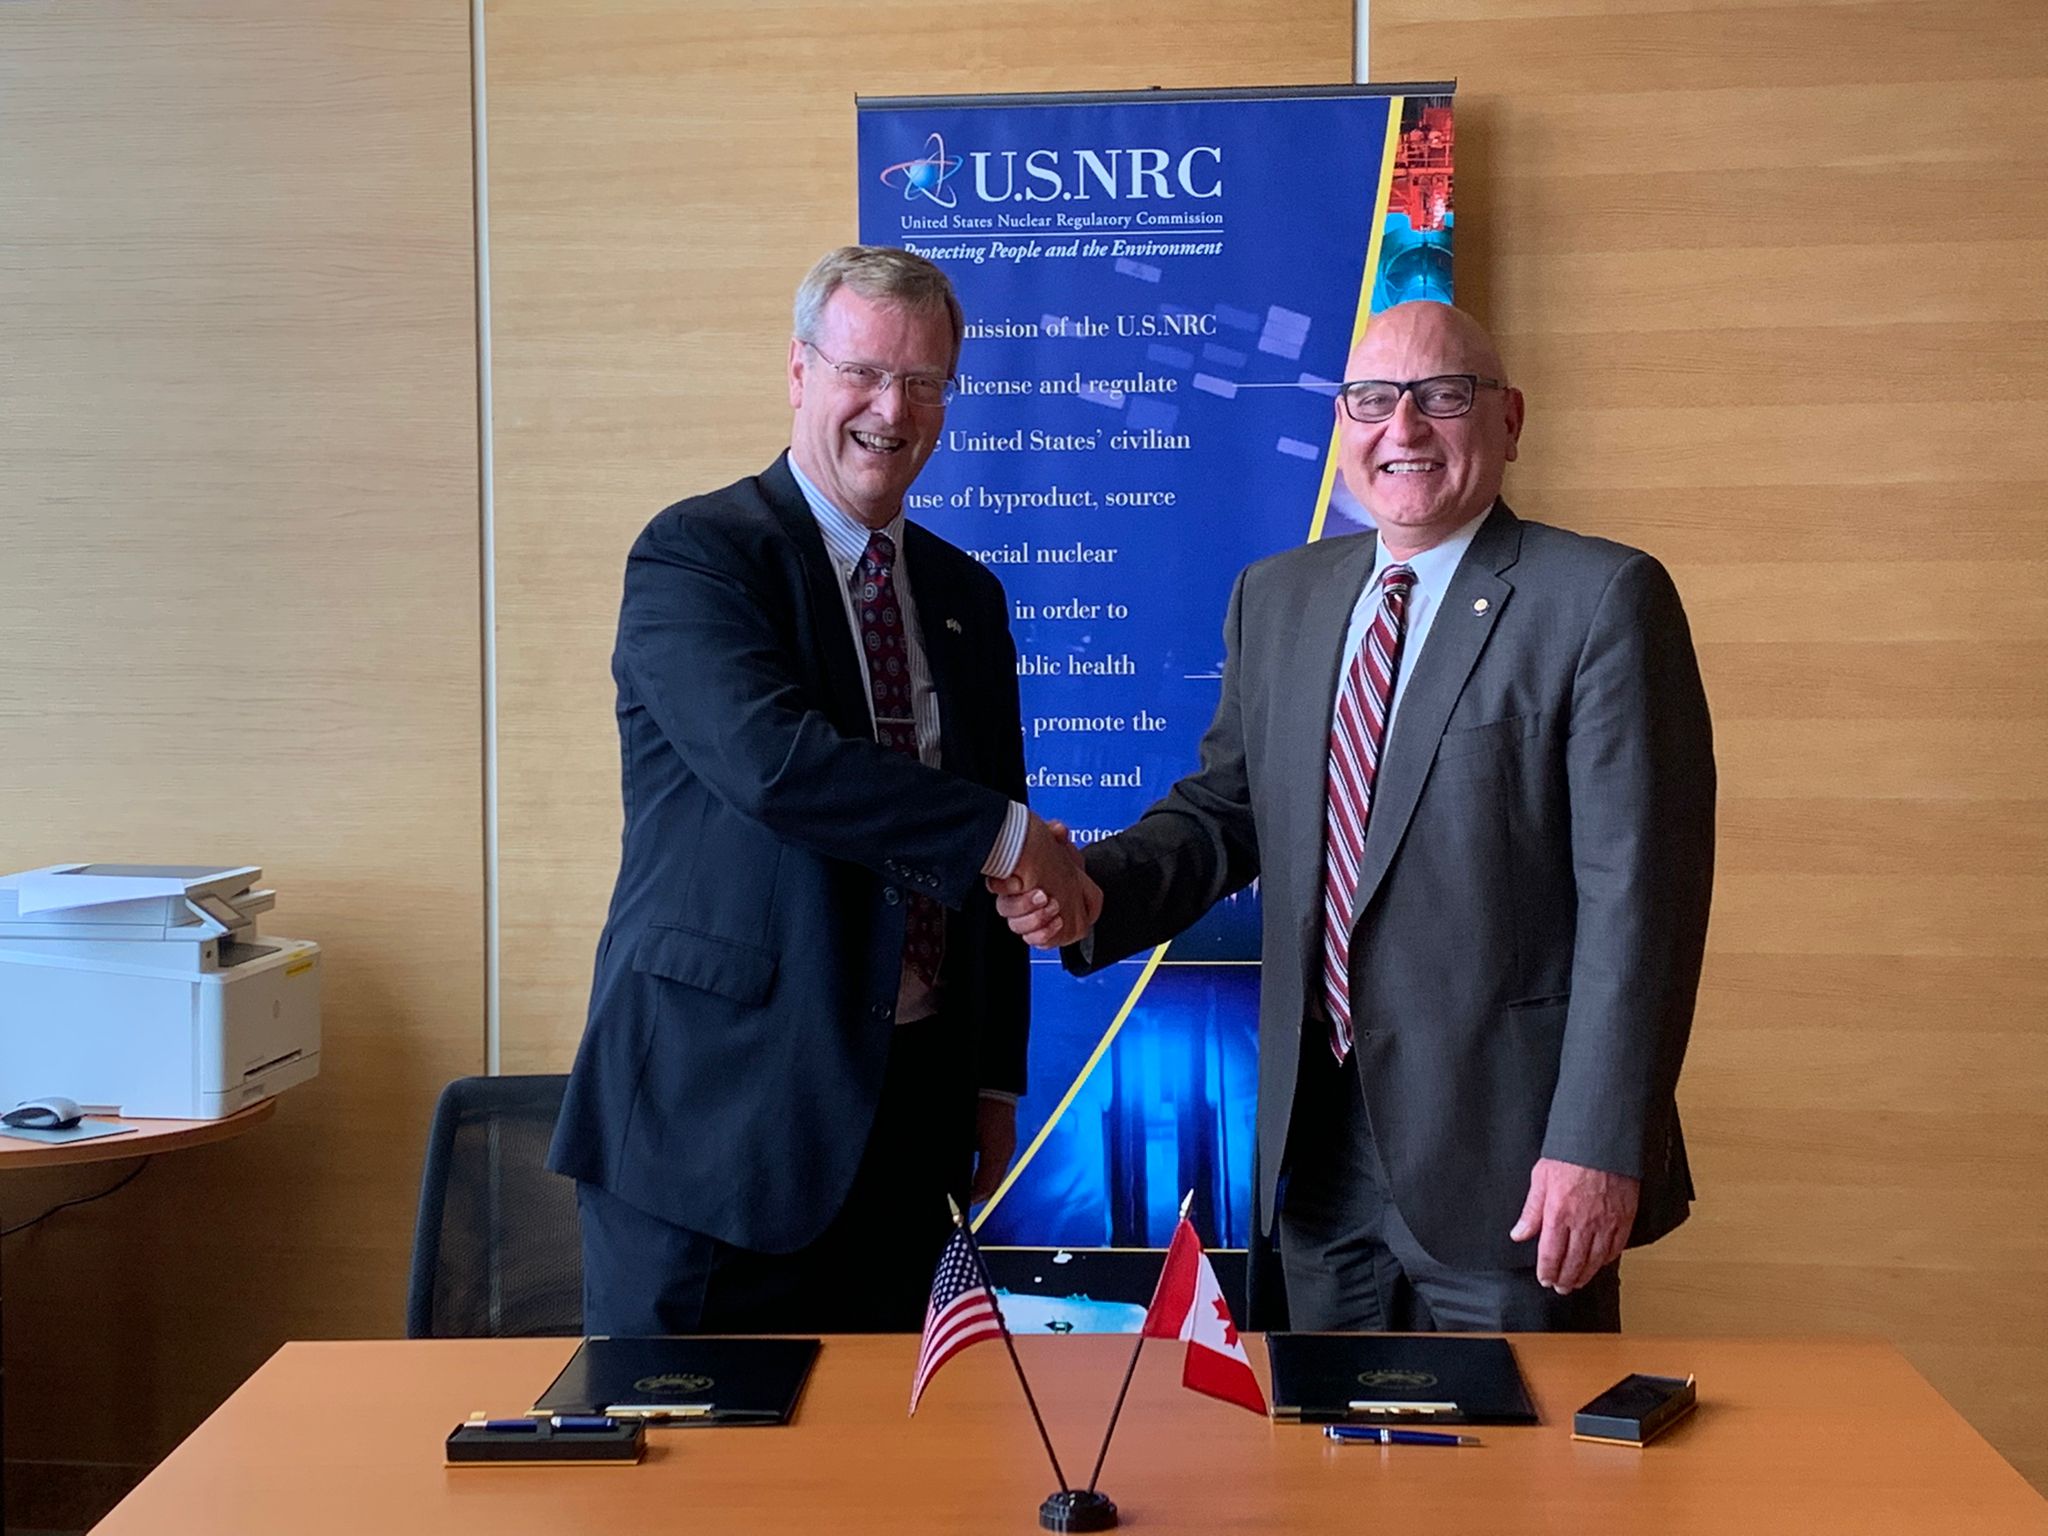 Daniel H. Dorman, U.S. NRC Executive Director for Operations (Left), and Ramzi Jammal, CNSC Executive Vice-President and Chief Regulatory Operations Officer (Right), at the signing of the charter.